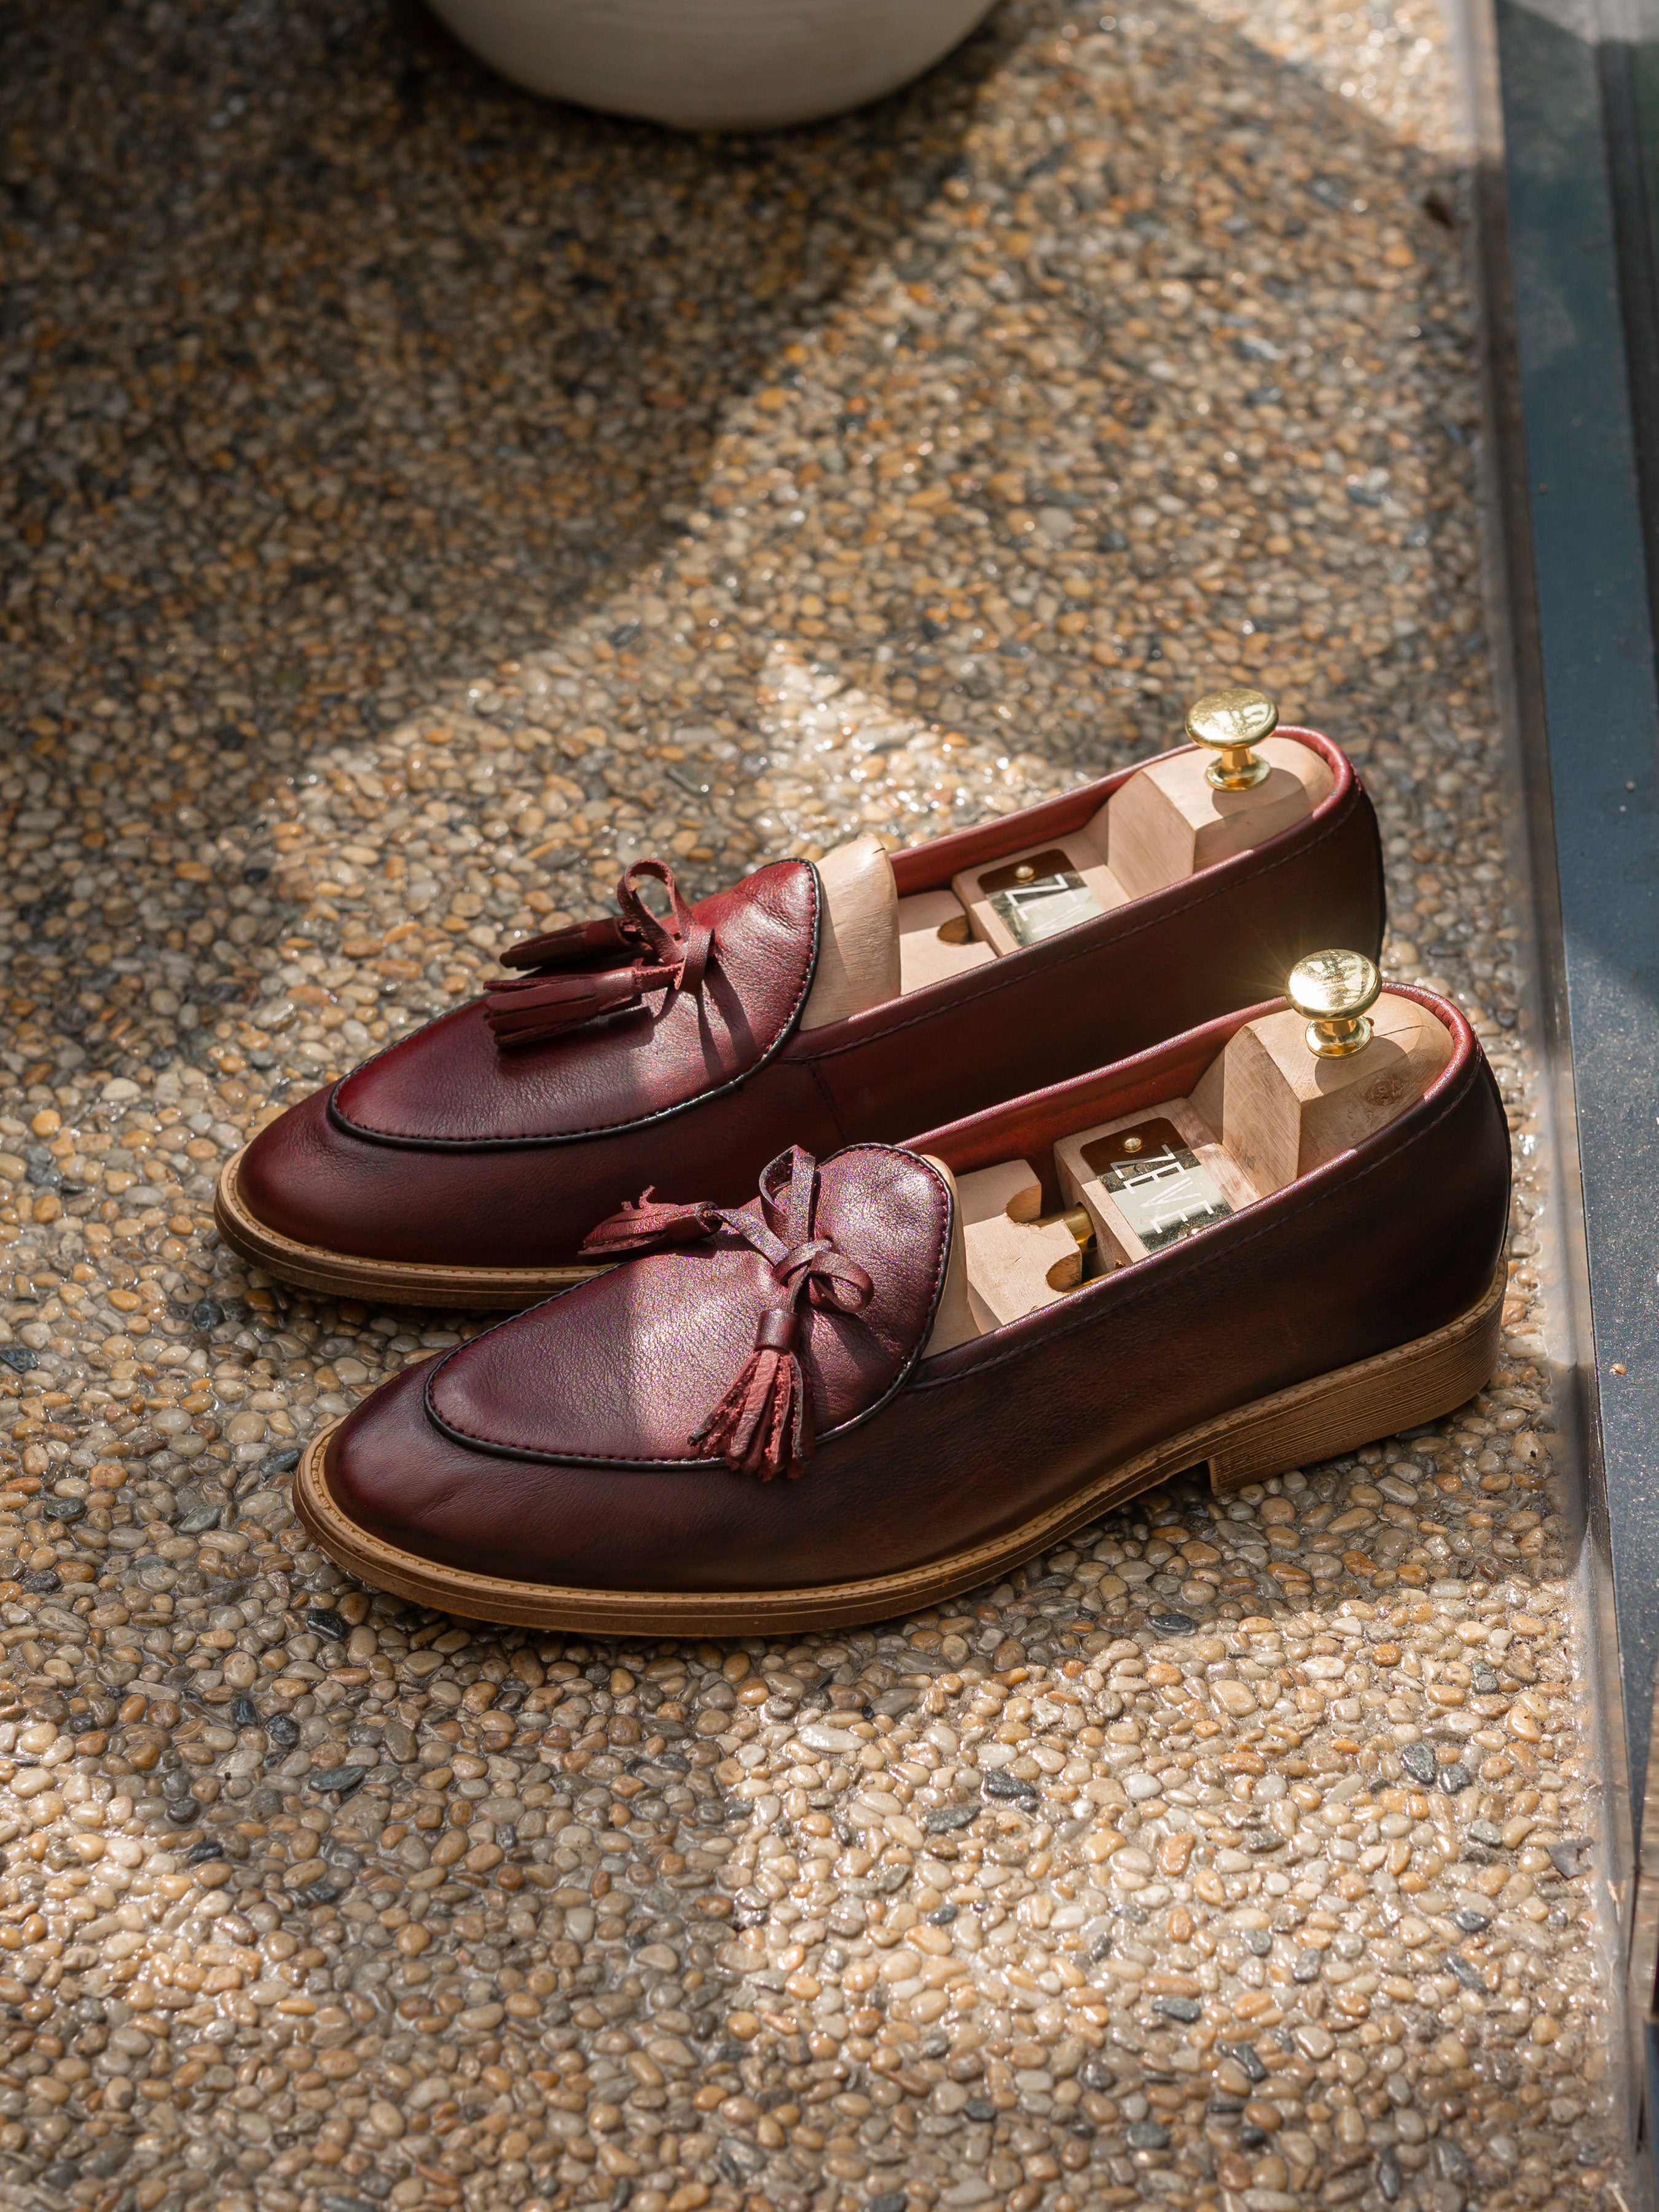 Belgian Loafer with Ribbon Tassel - Red Burgundy Leather (Flexi-Sole) - Zeve Shoes